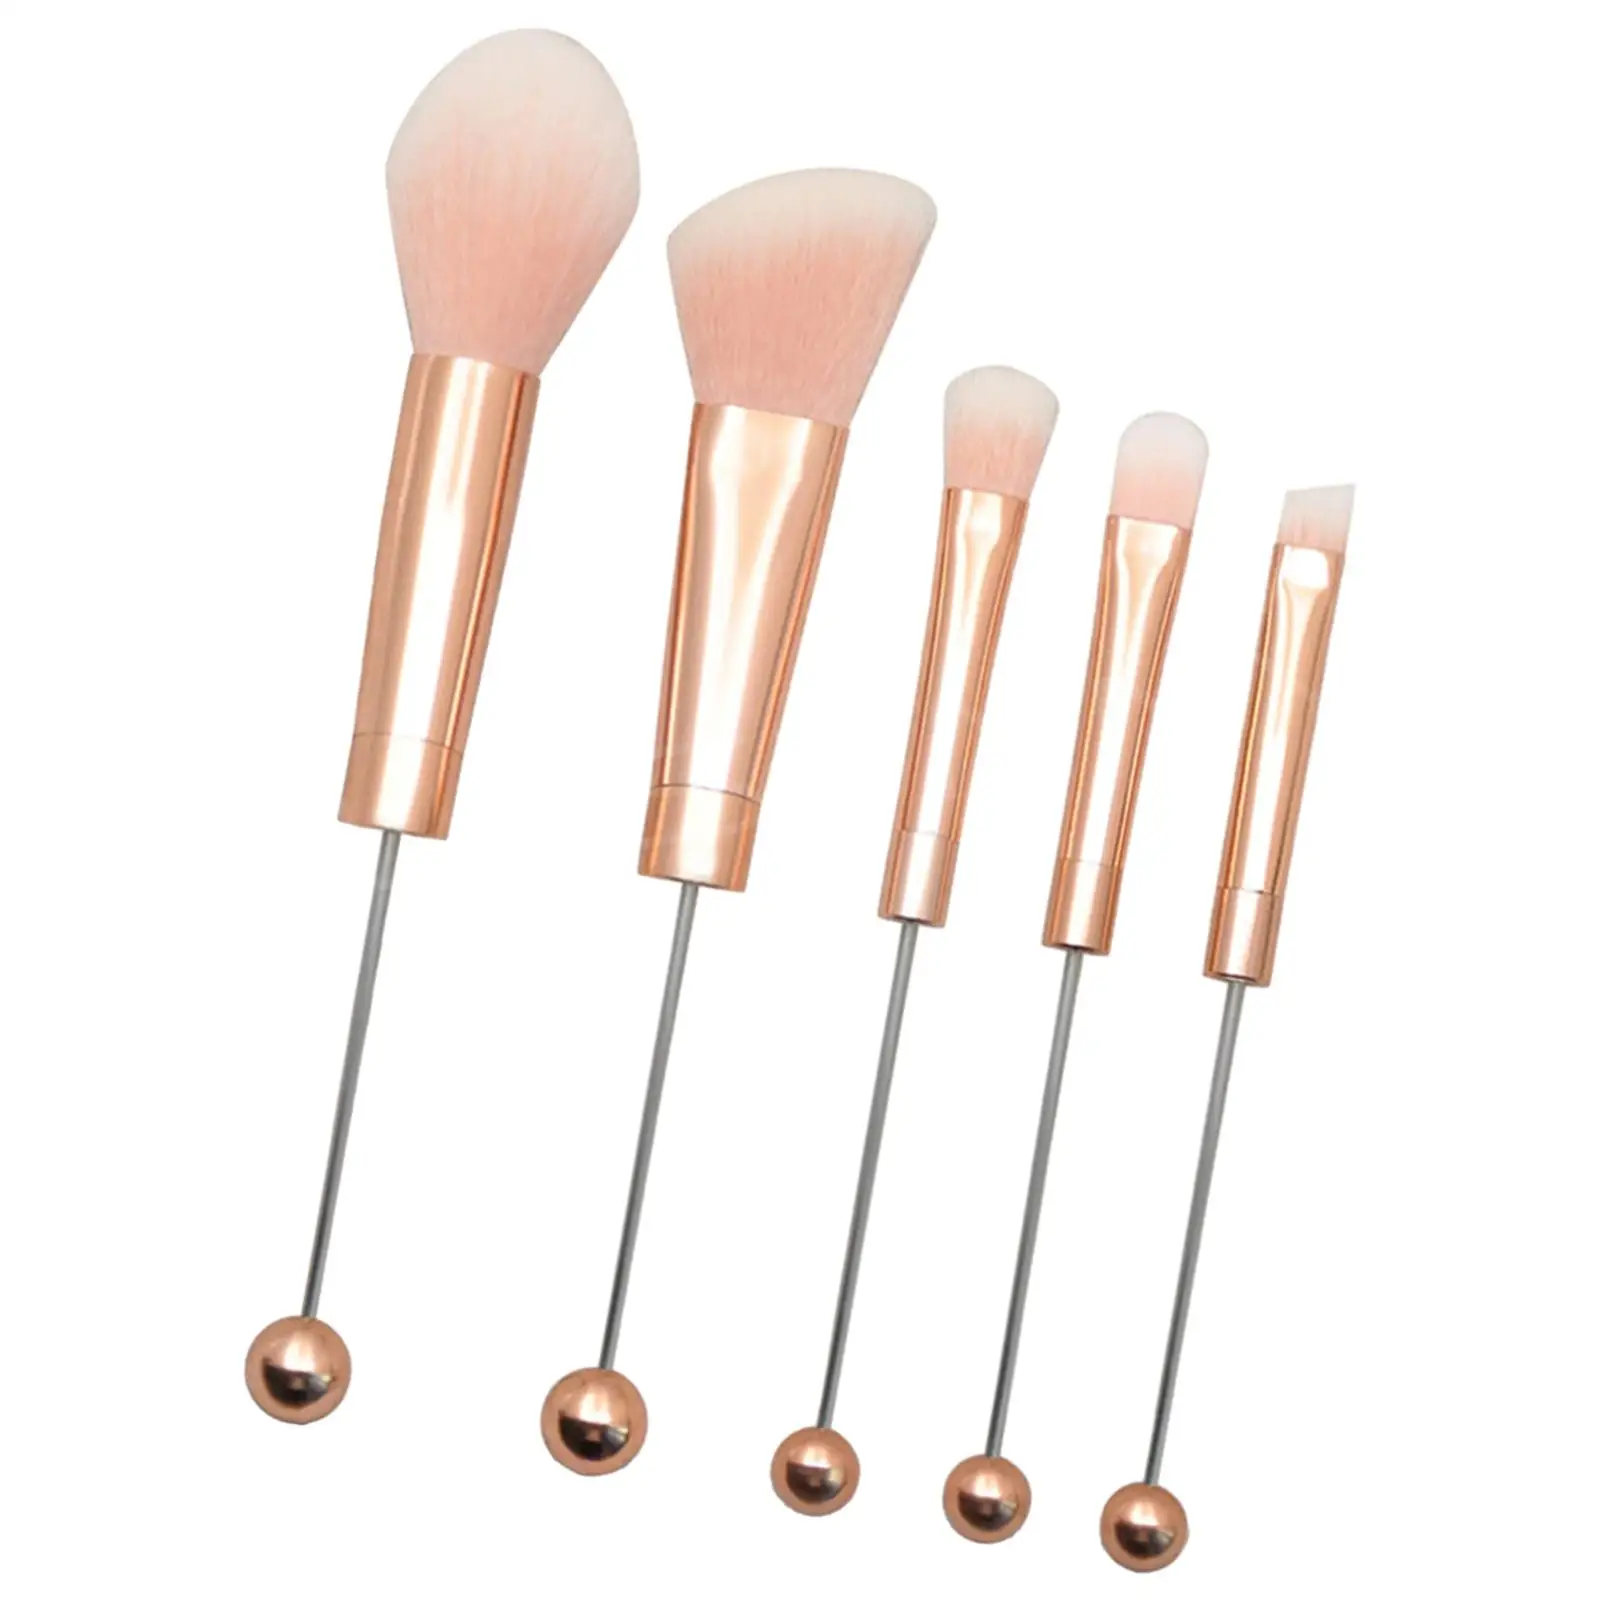 5x Eye Makeup Brush Set Blending and Lips Foundation Eyebrow Face Makeup Brush Kits for Lady Bestie Women Adults Holiday Gifts